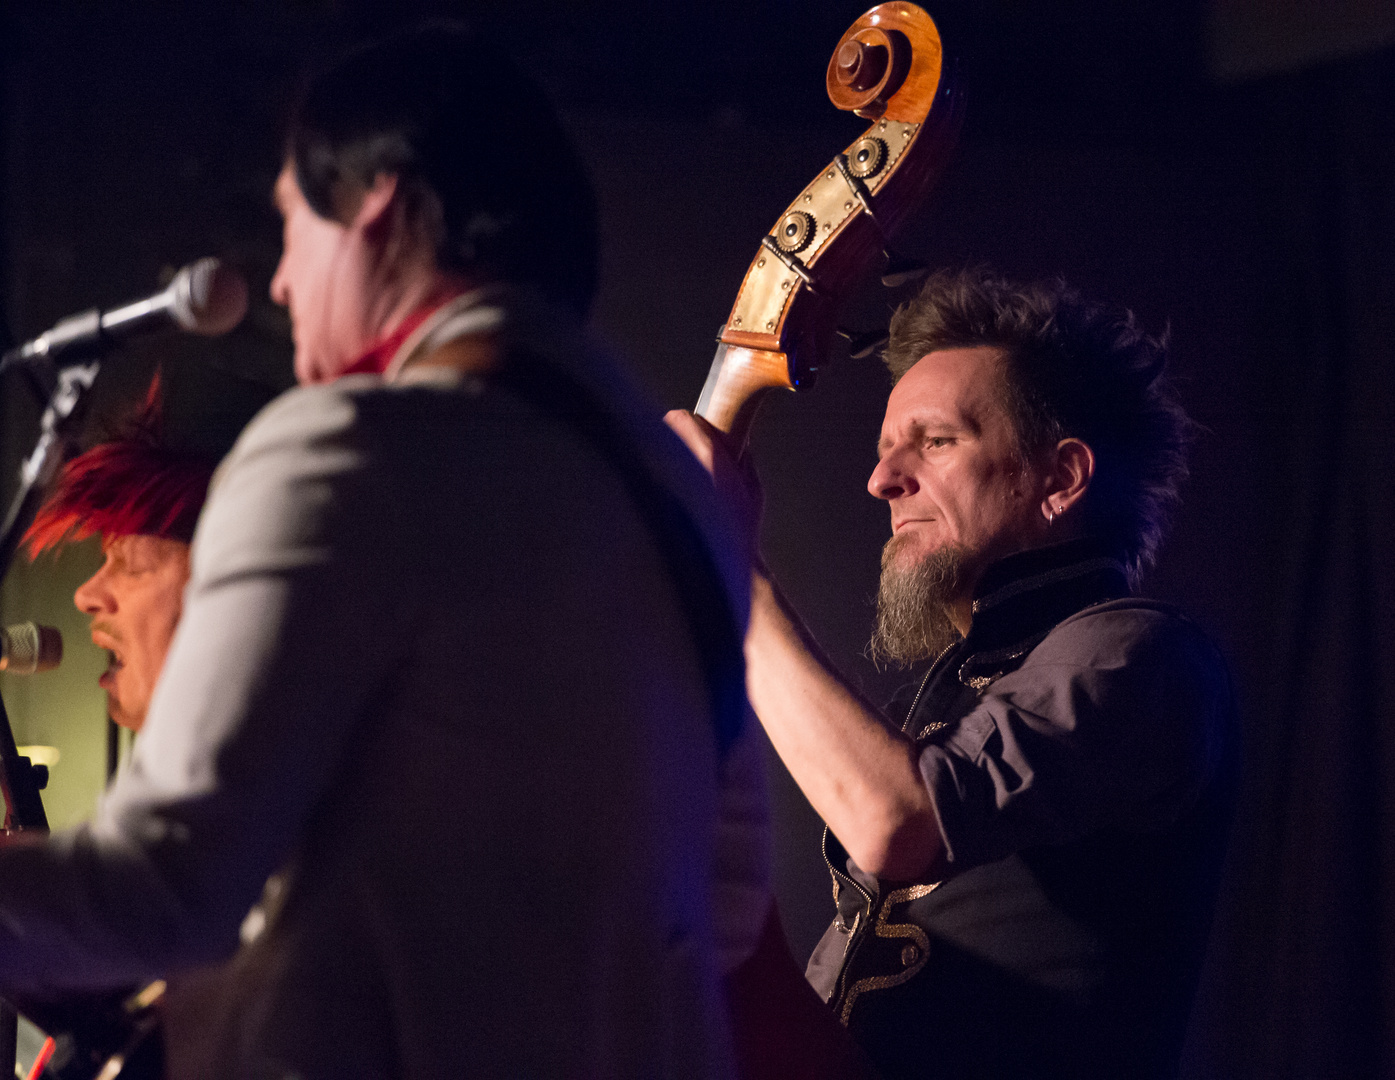 Dr. Will and the Wizards - Juergen Reiter - Upright Bass